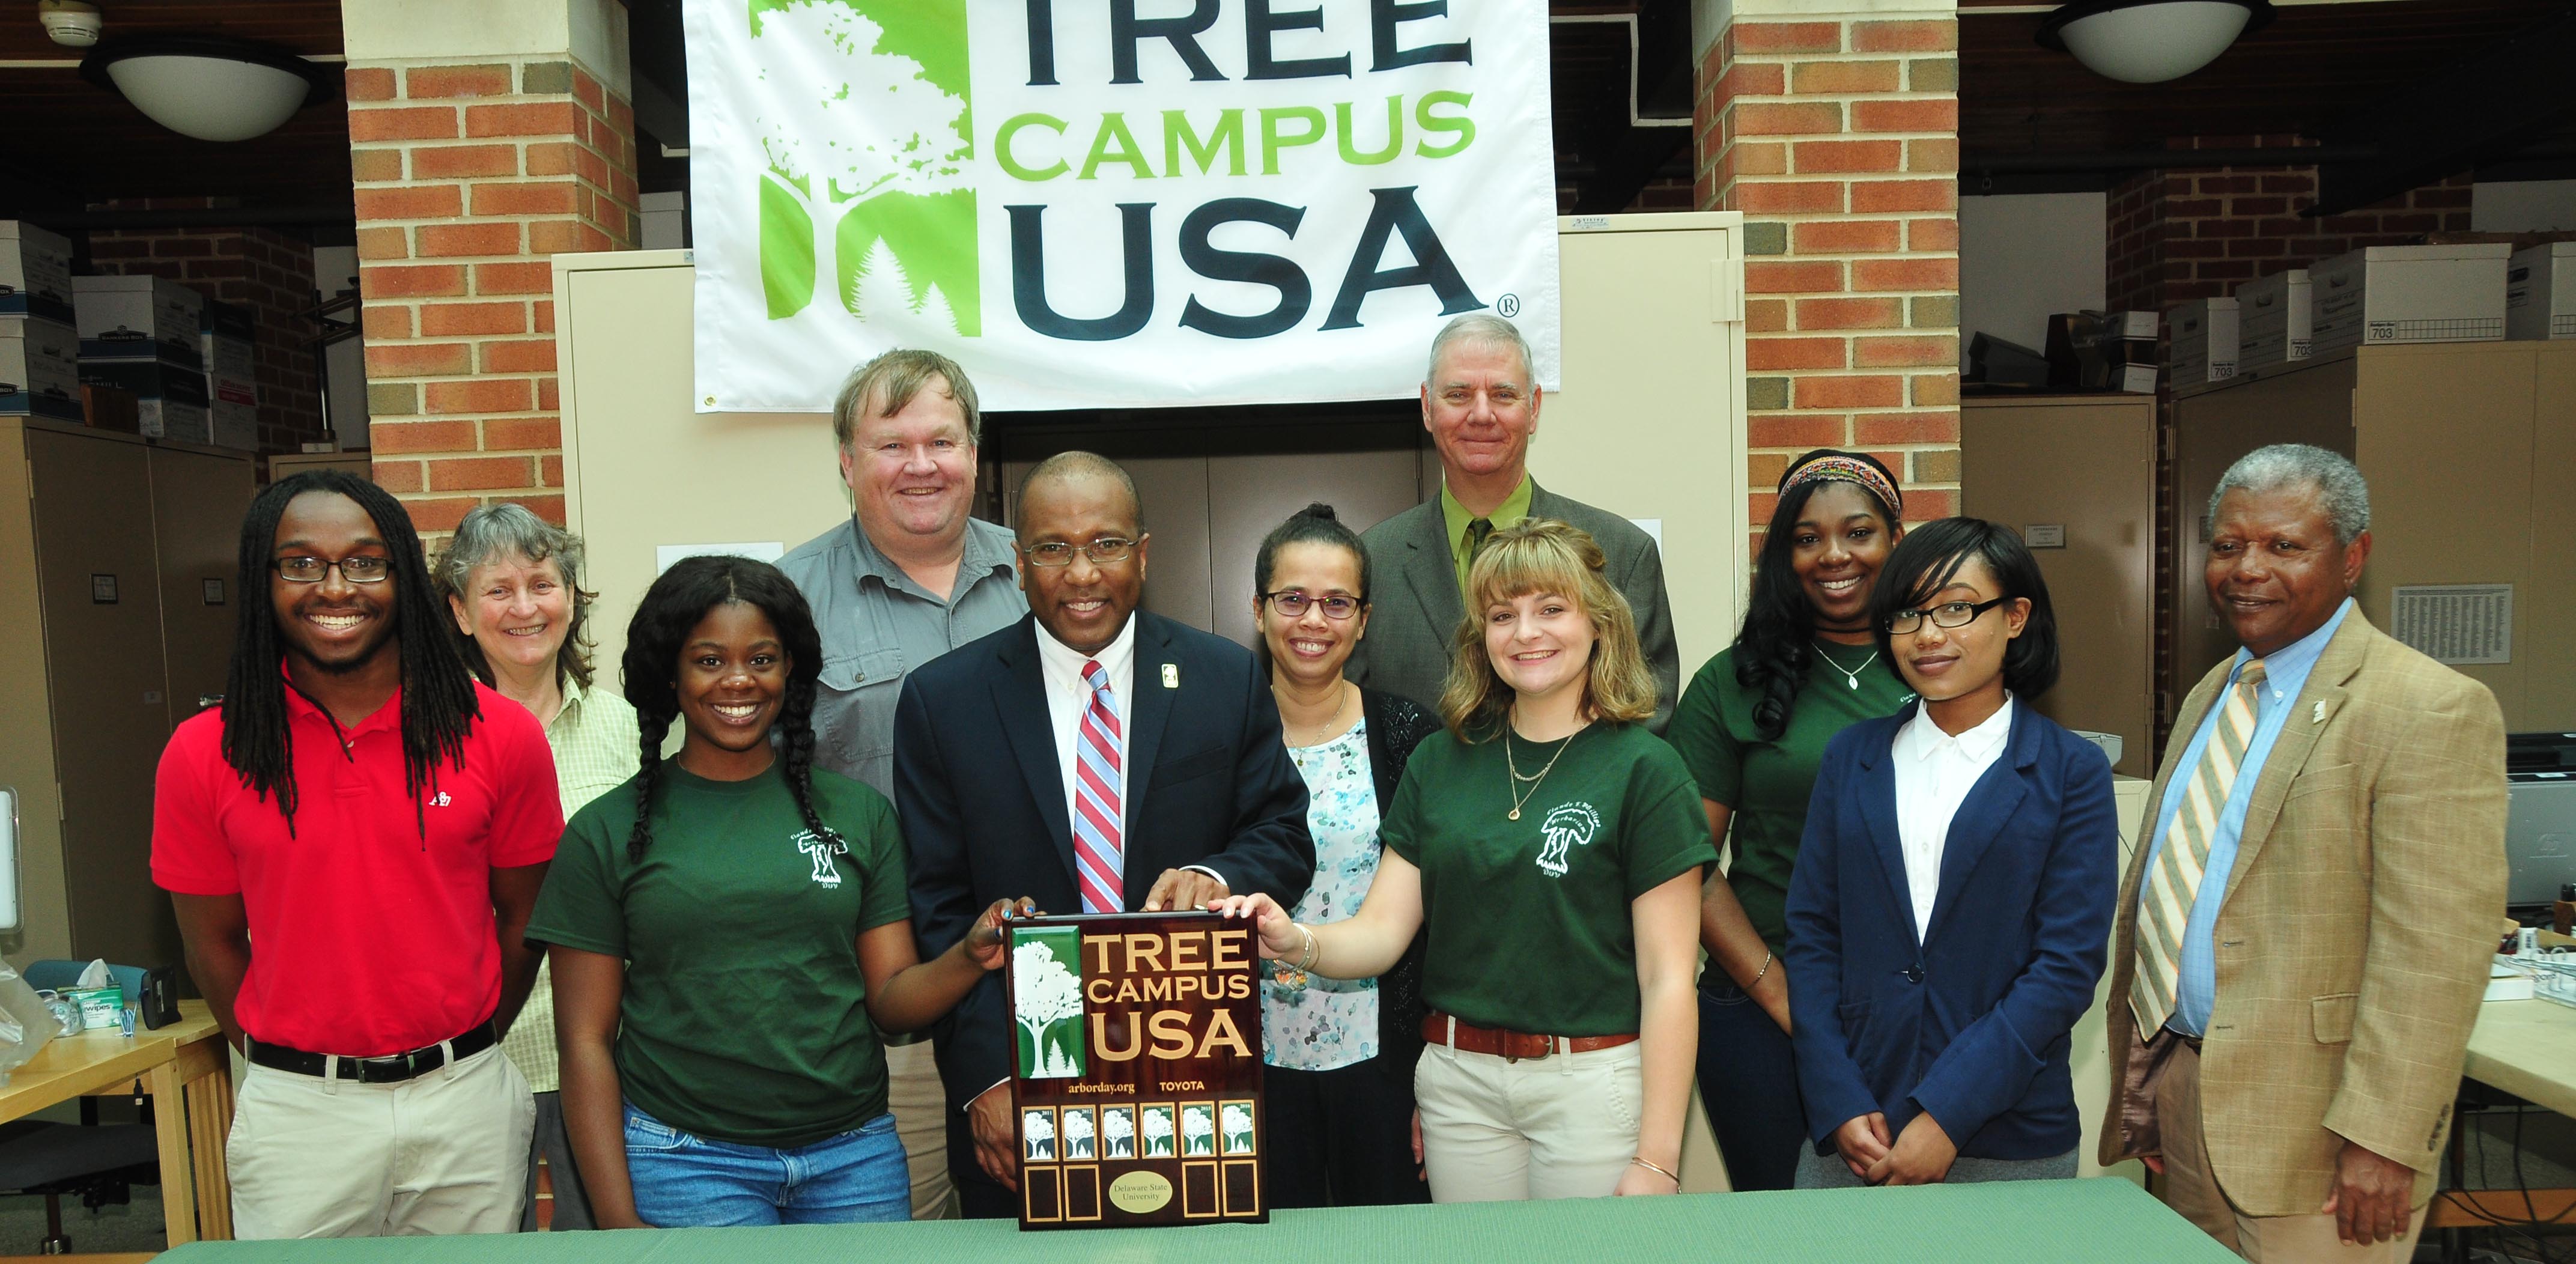 Displaying DSU's Tree Campus USA designation, DSU President Harry L. Williams (center) is joined by DSU faculty members; Dr. Michael Valenti, state forestry administrator, and DSU students.